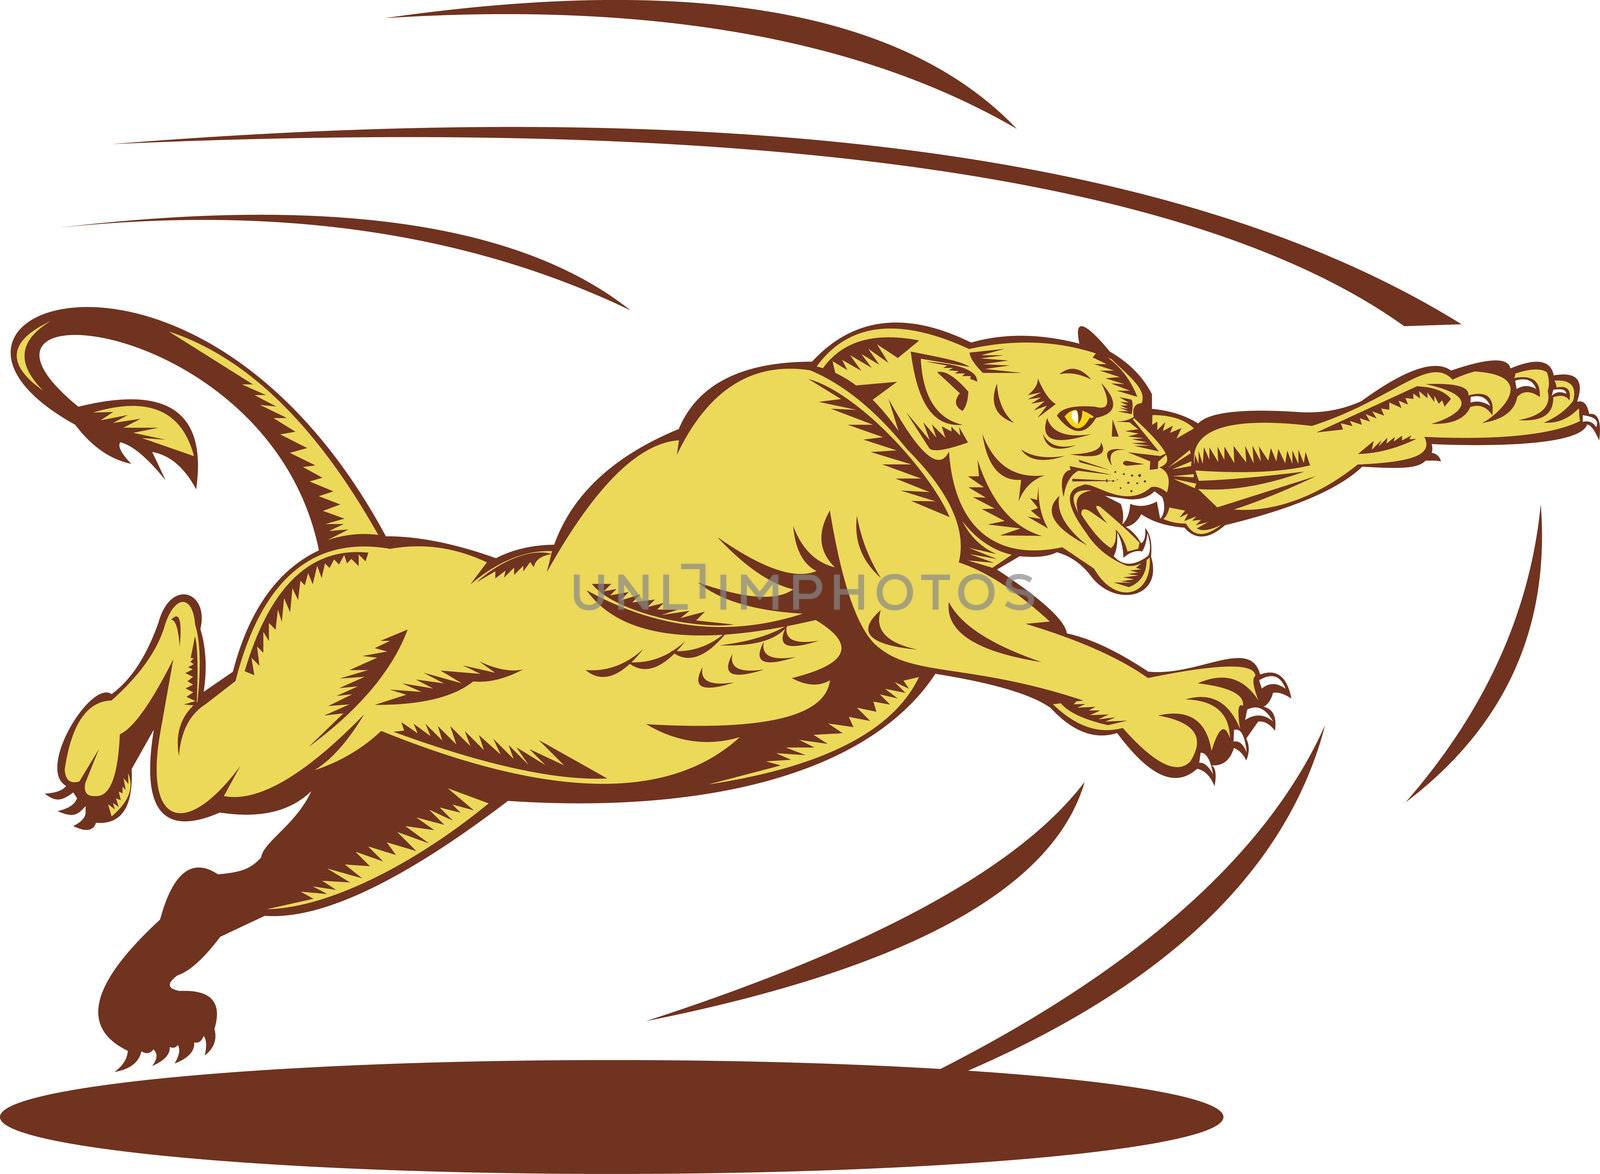 illustration of a Lioness jumping and attacking woodcut style